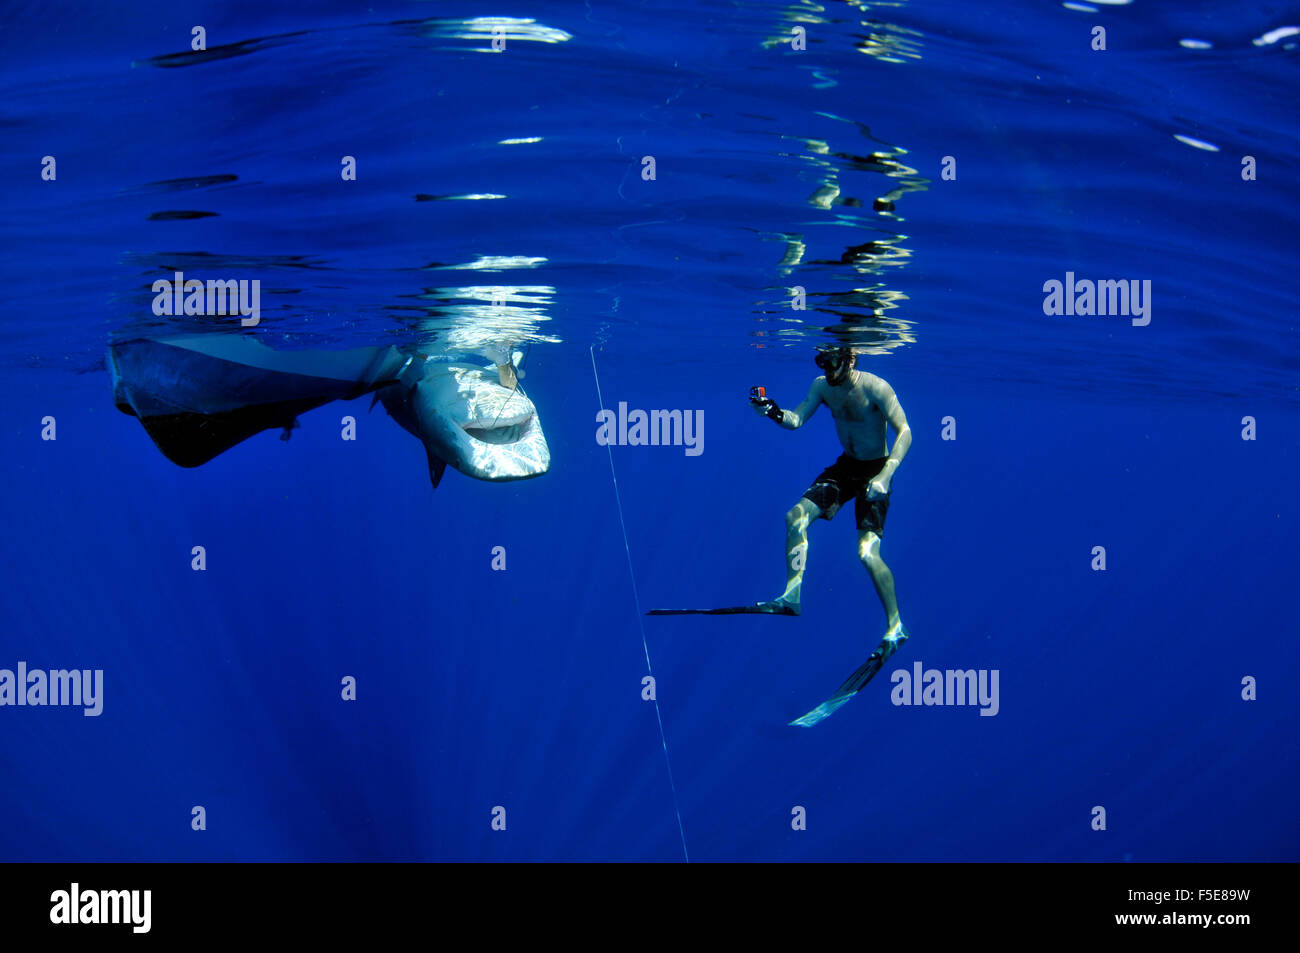 Diver records a tiger shark, Galeocerdo cuvier, in tonic immobility, Kaneohe, Oahu, Hawaii, USA Stock Photo